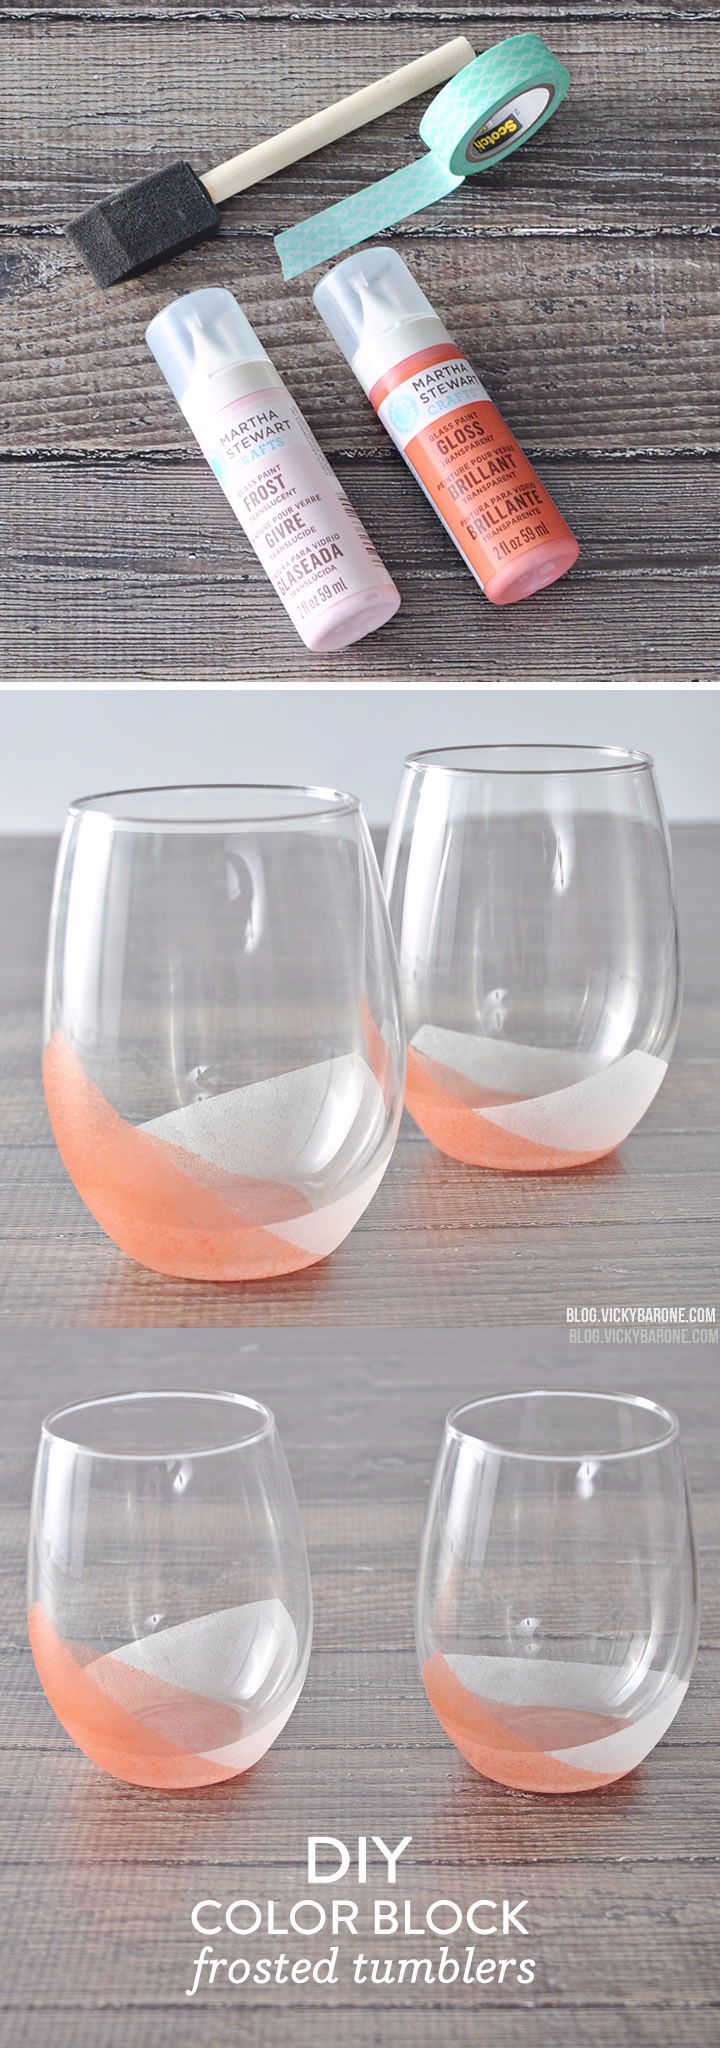 DIY Color Block Frosted Tumblers